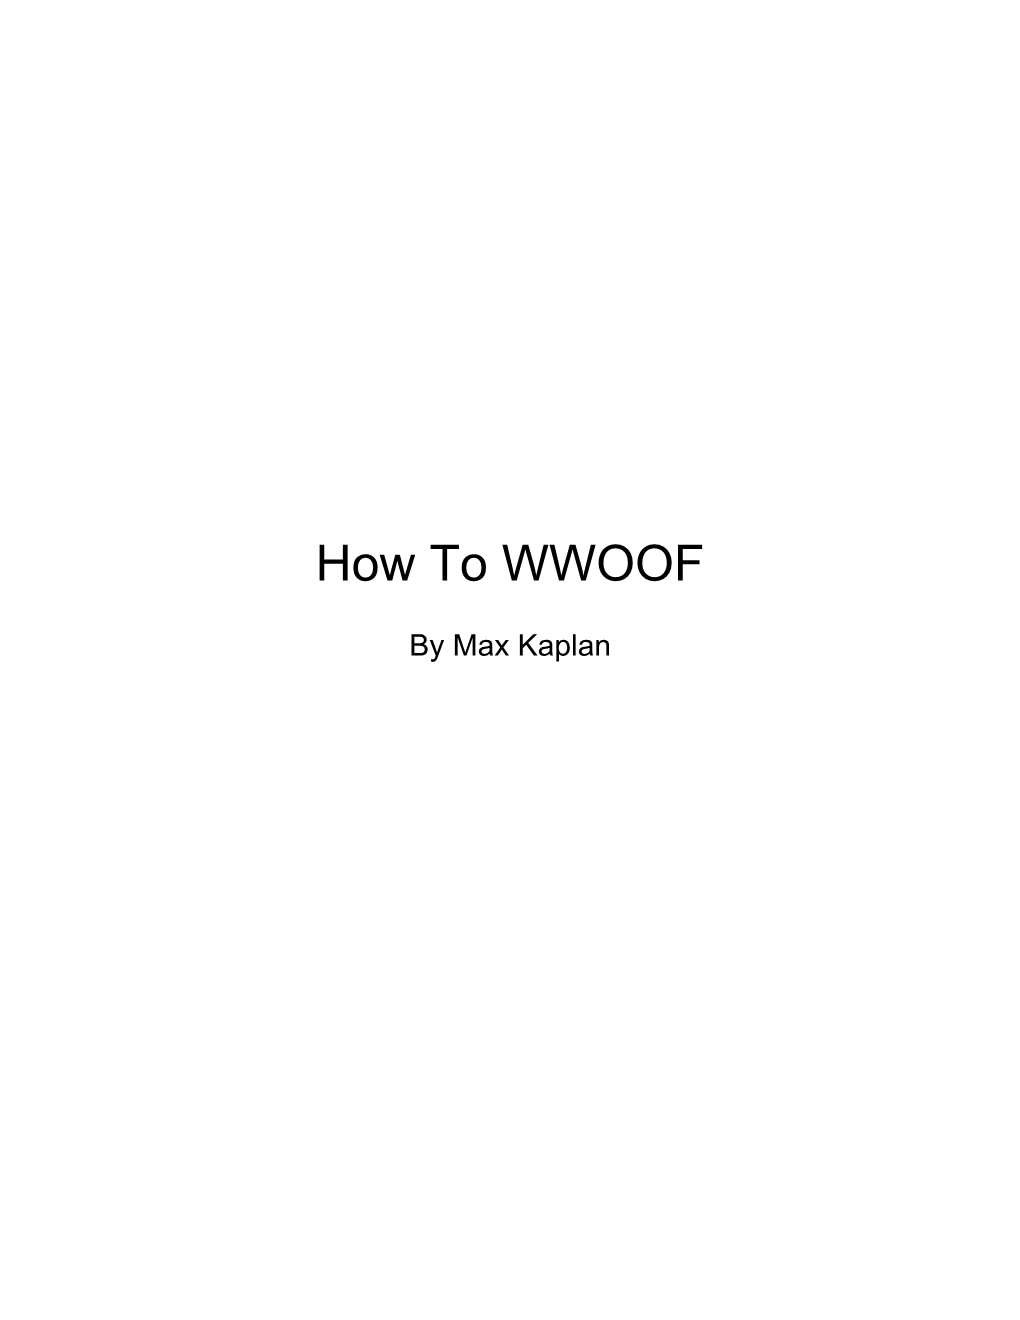 How to WWOOF